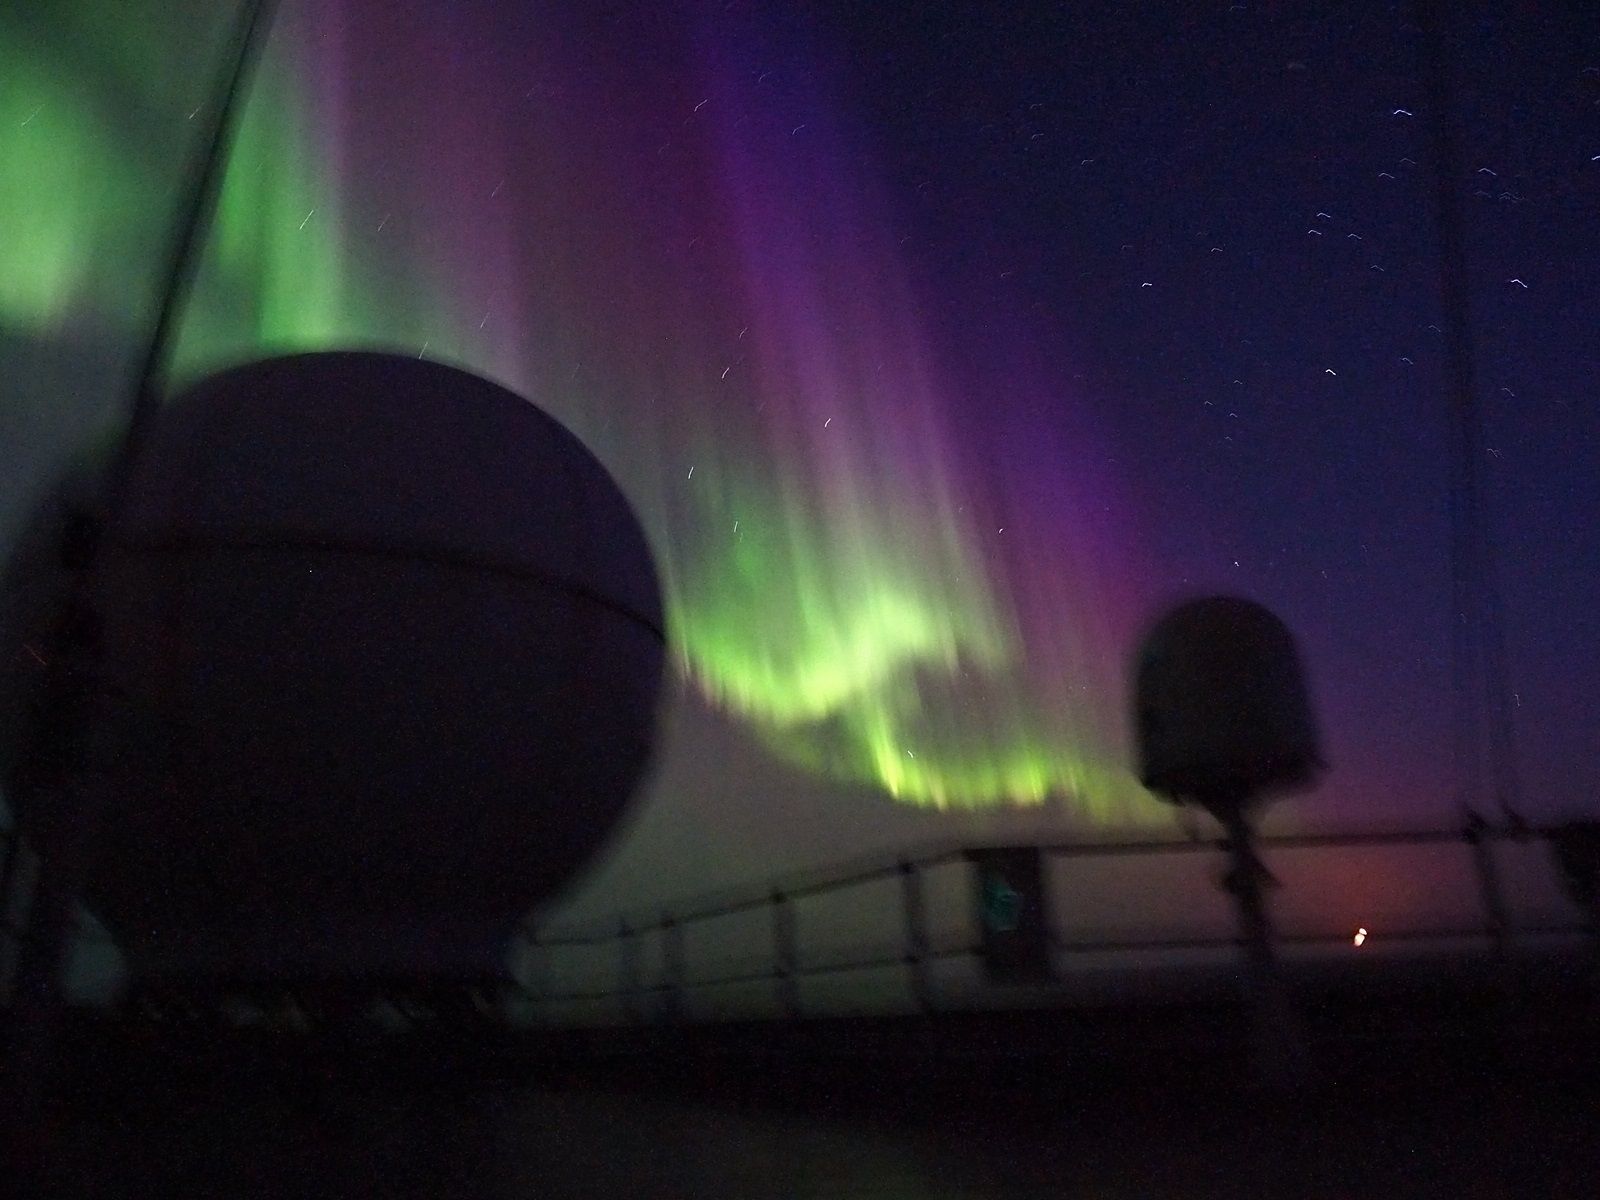 Tips for aurora photography on board a ship